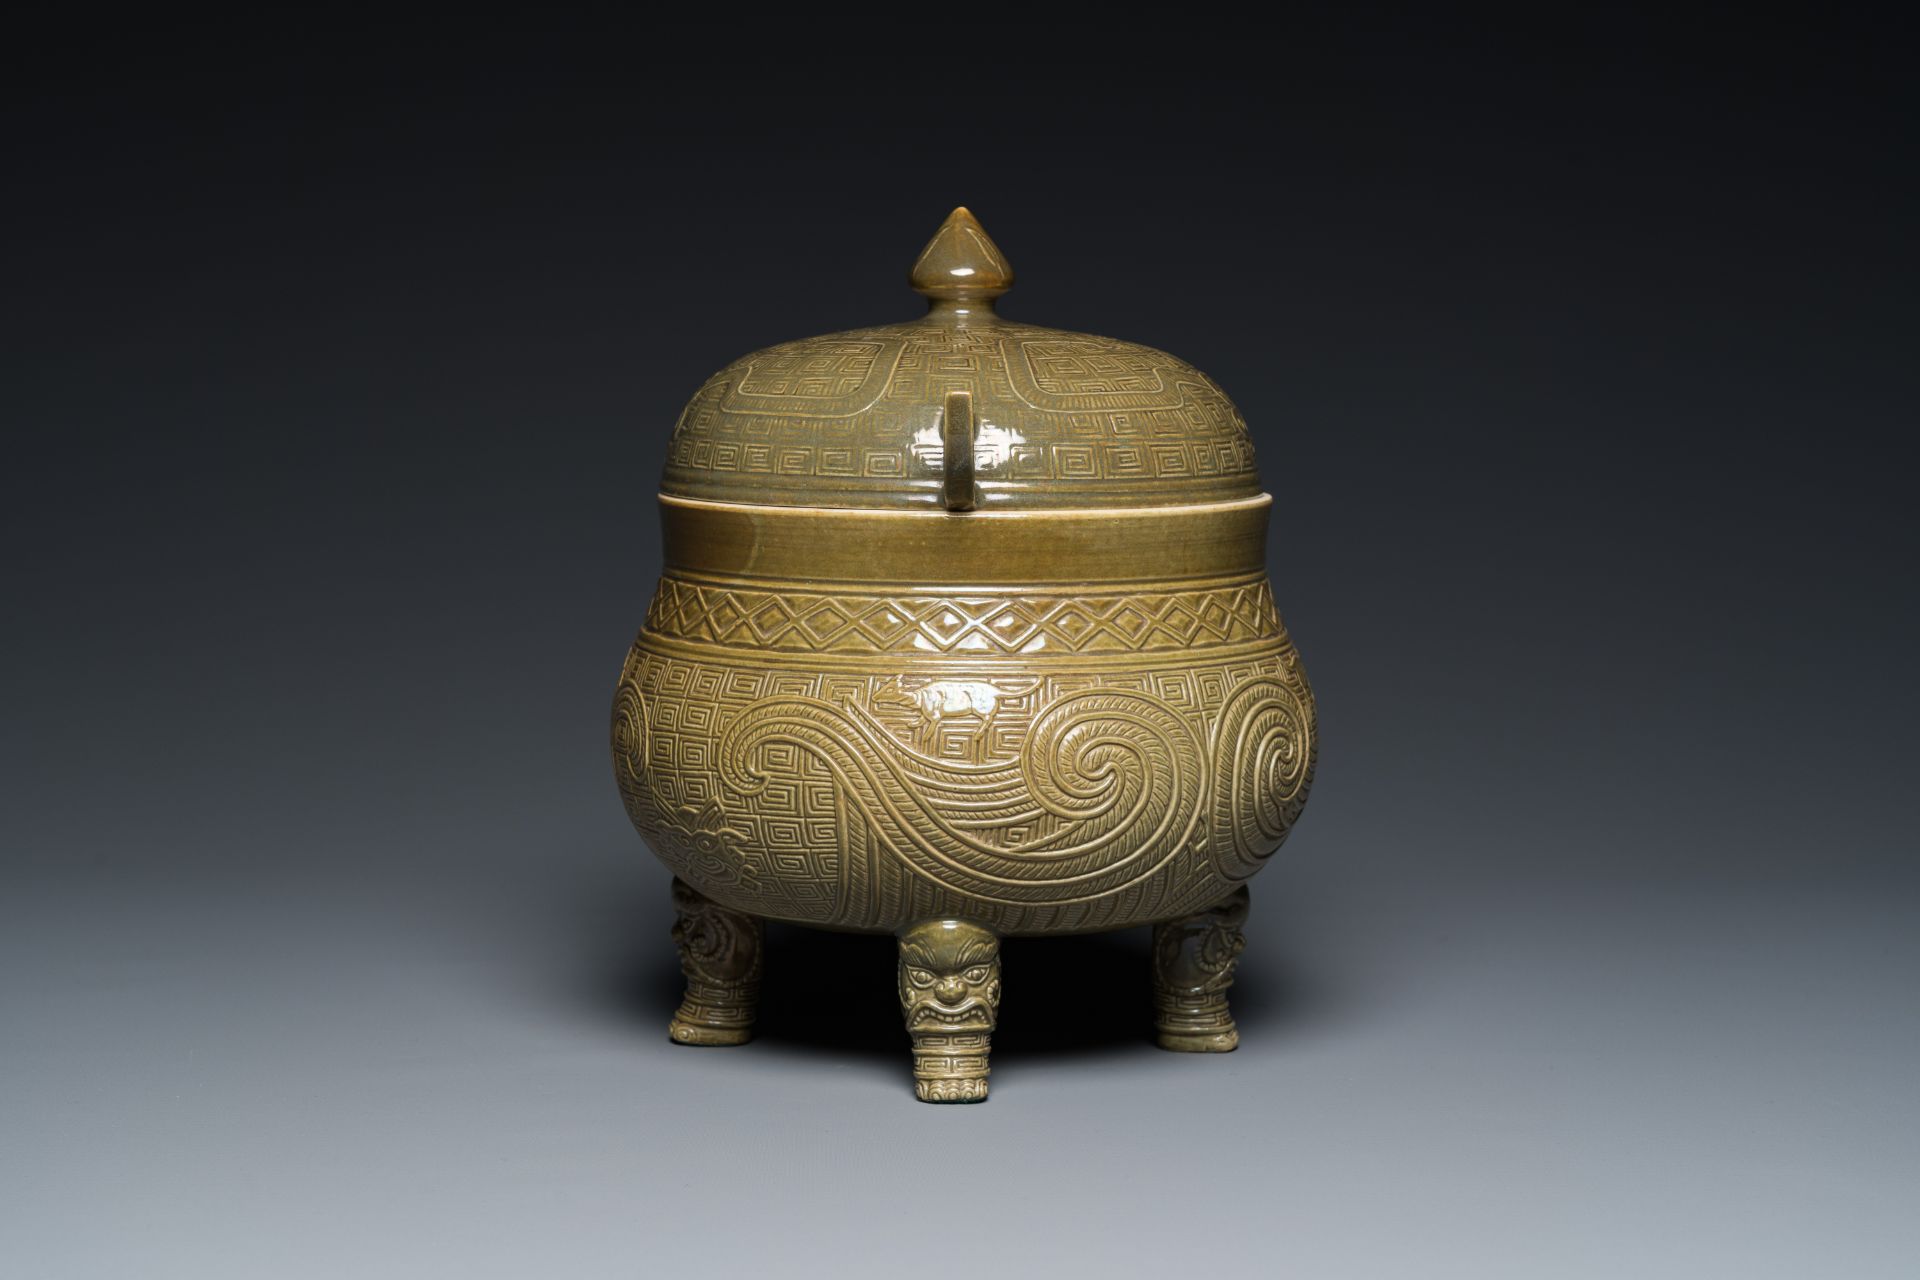 A rare Chinese teadust-glazed food vessel & cover, 'dui 敦', Hua Ting Shi Zhi 華亭氏製 mark, late 19th C. - Image 5 of 7